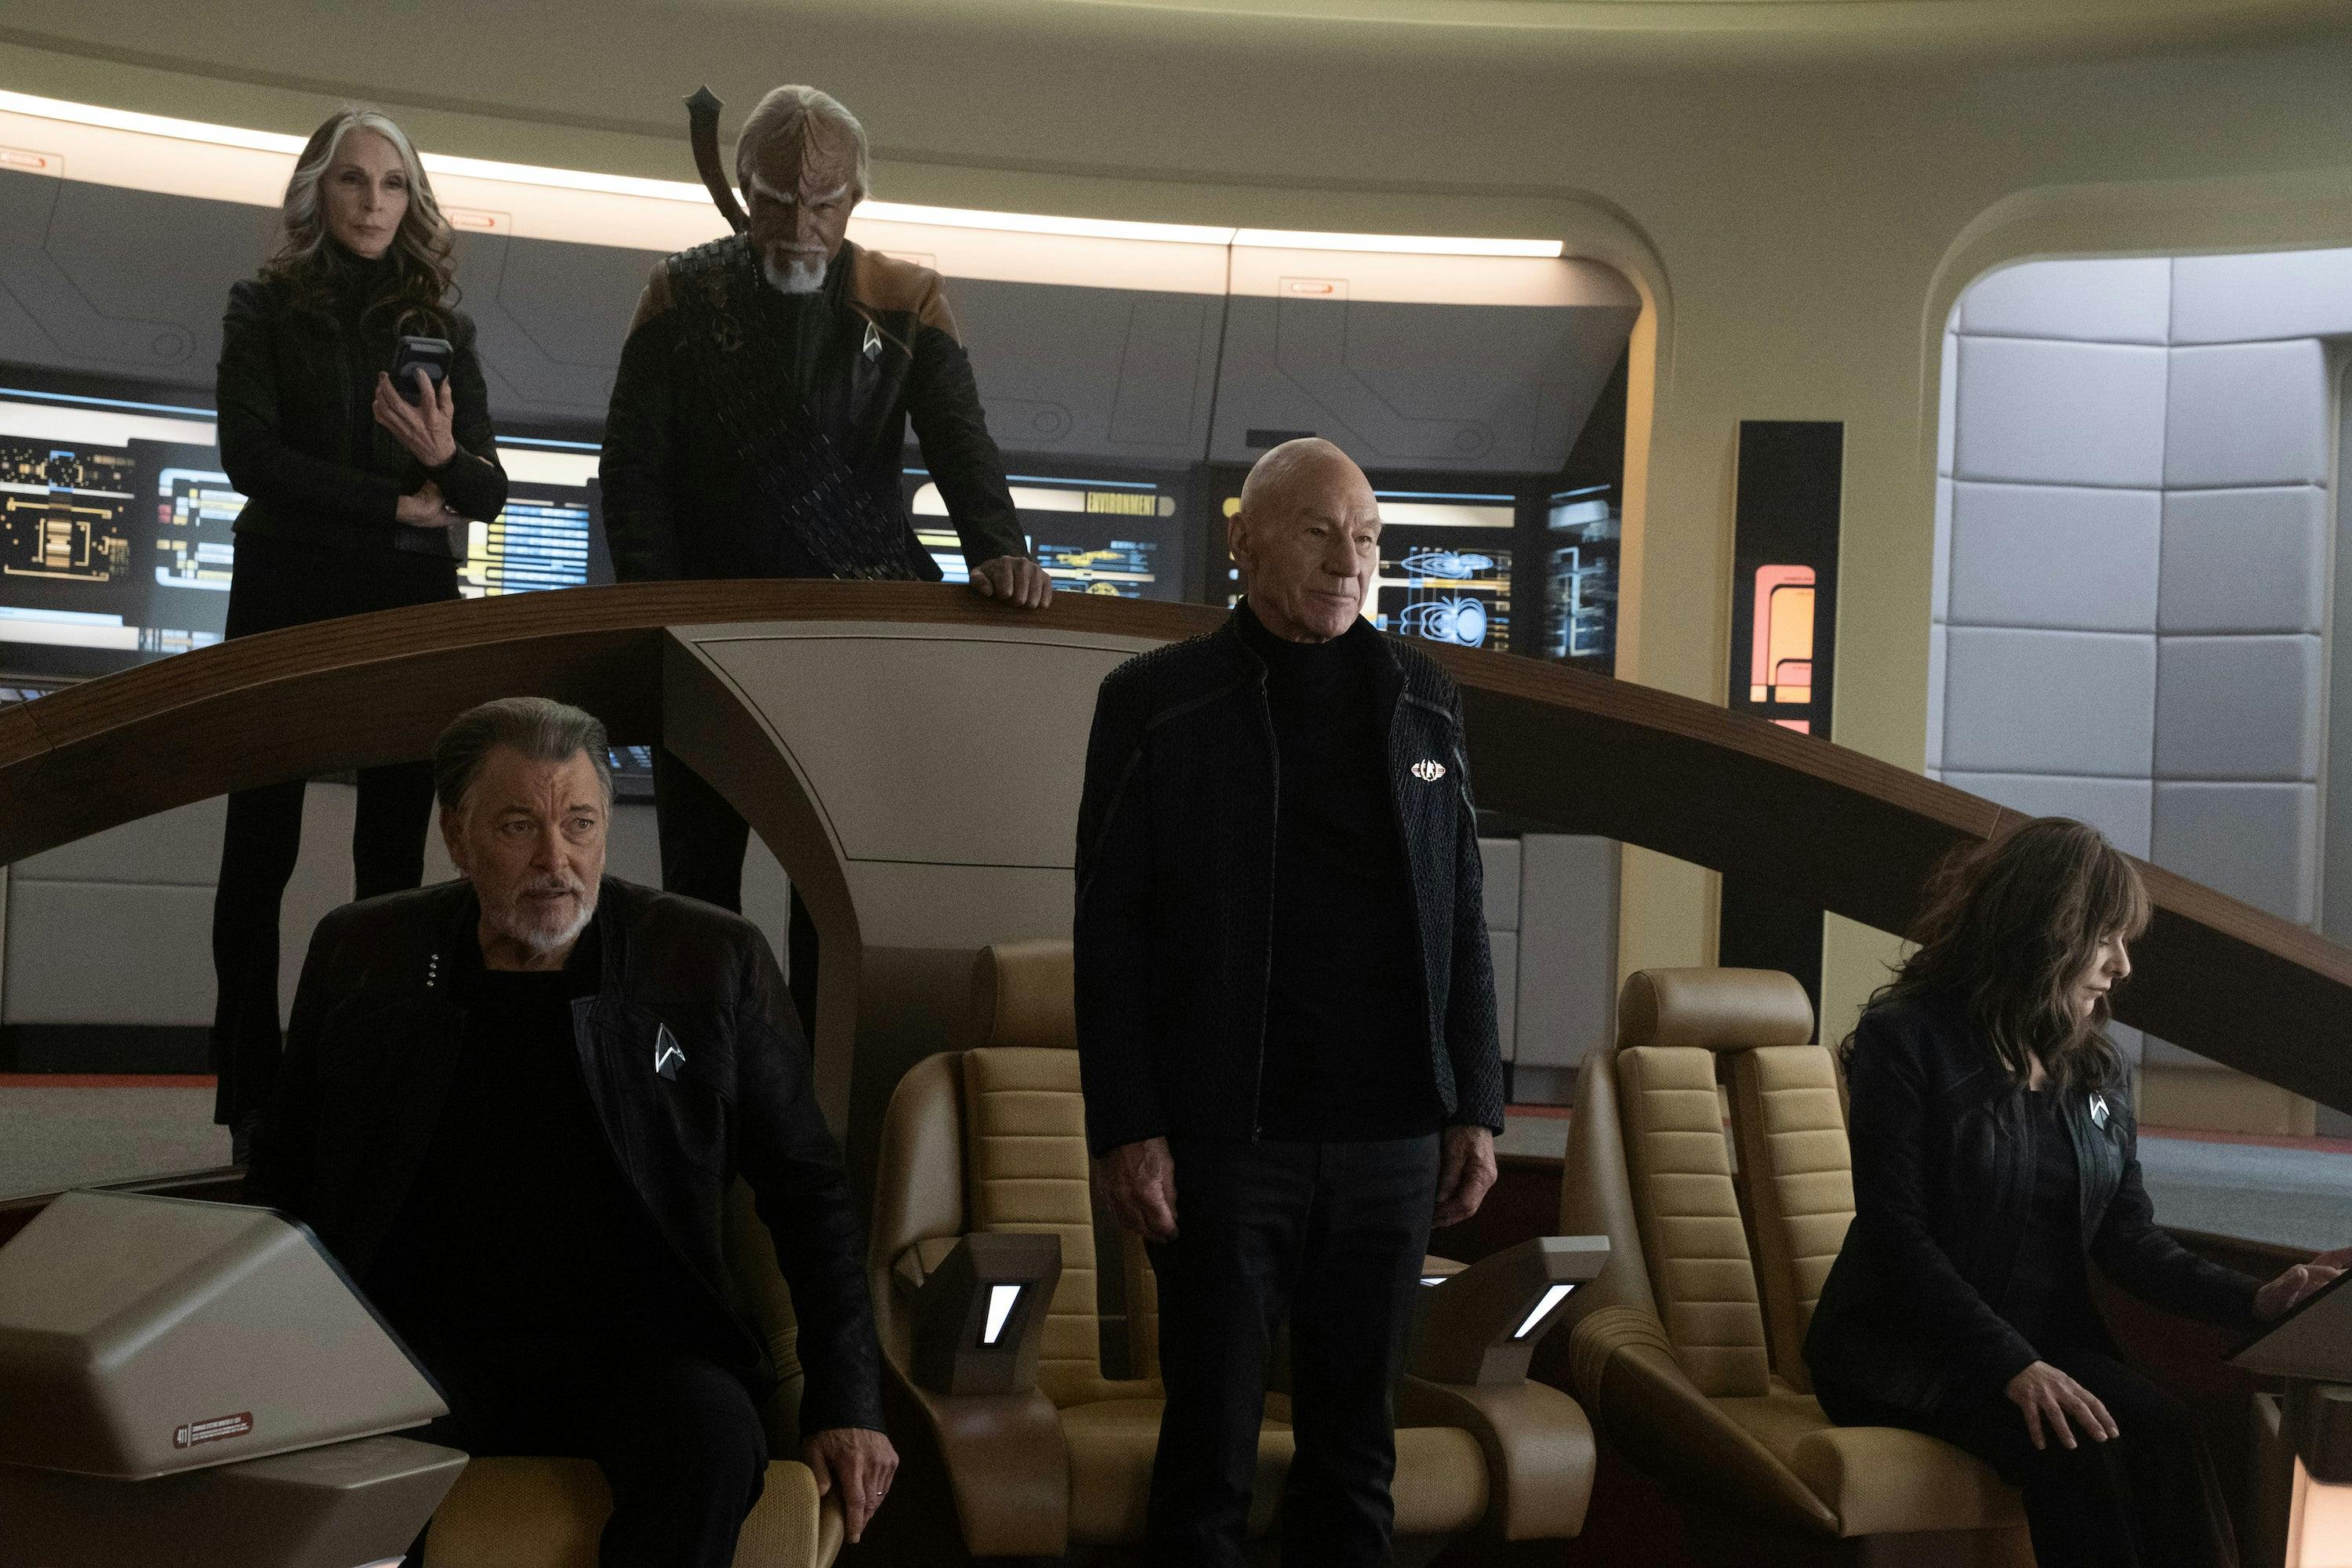 Beverly, Worf, Riker, Picard, and Deanna at their old stations on the Bridge of the reconstructed Enterprise-D in 'Vox'